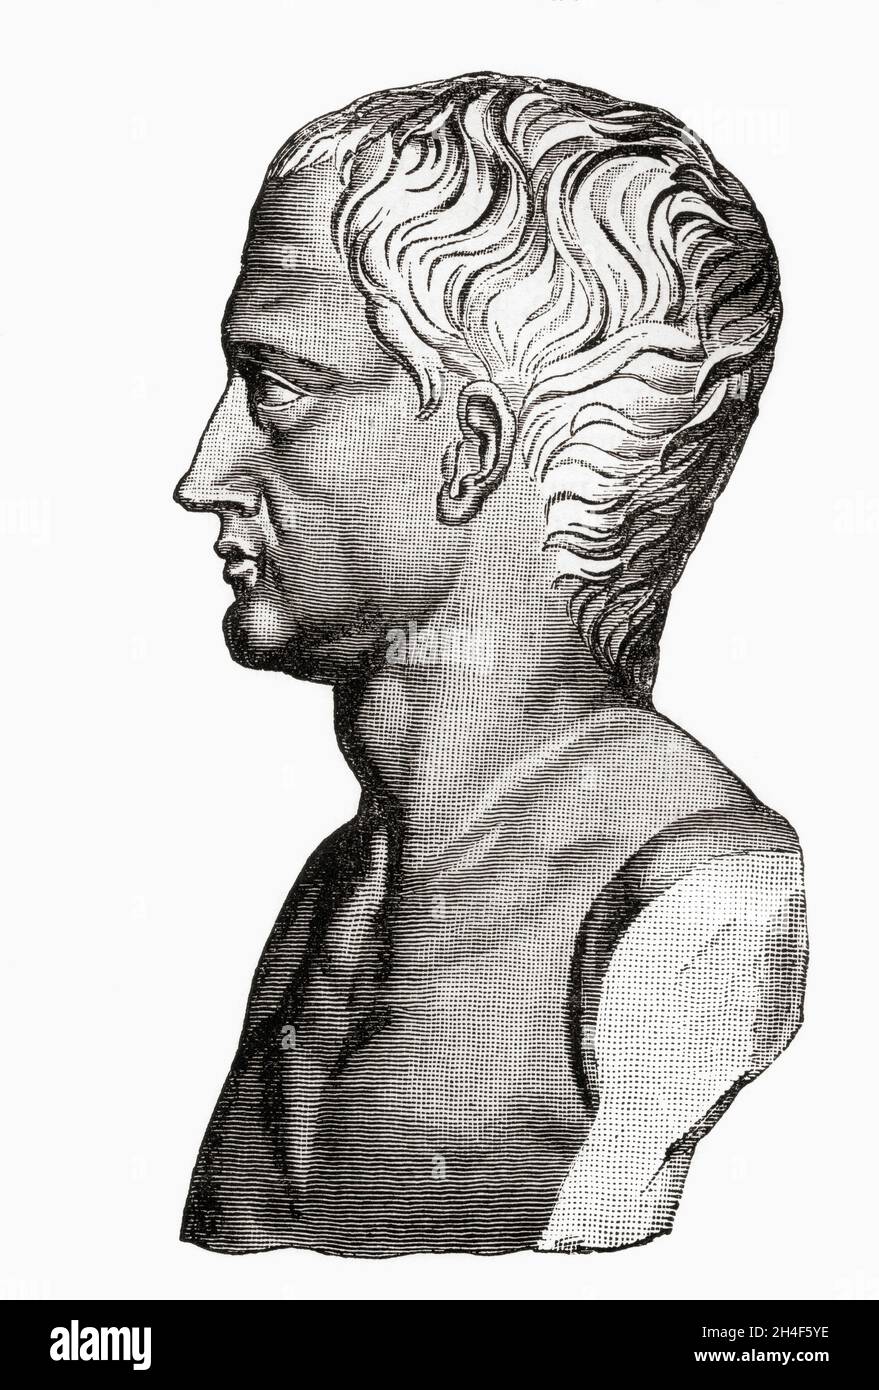 Quintus Hortensius Hortalus, 114–50 BC.  Famous Roman lawyer, renowned orator and statesman.  From Cassell's Illustrated Universal History, published 1883. Stock Photo